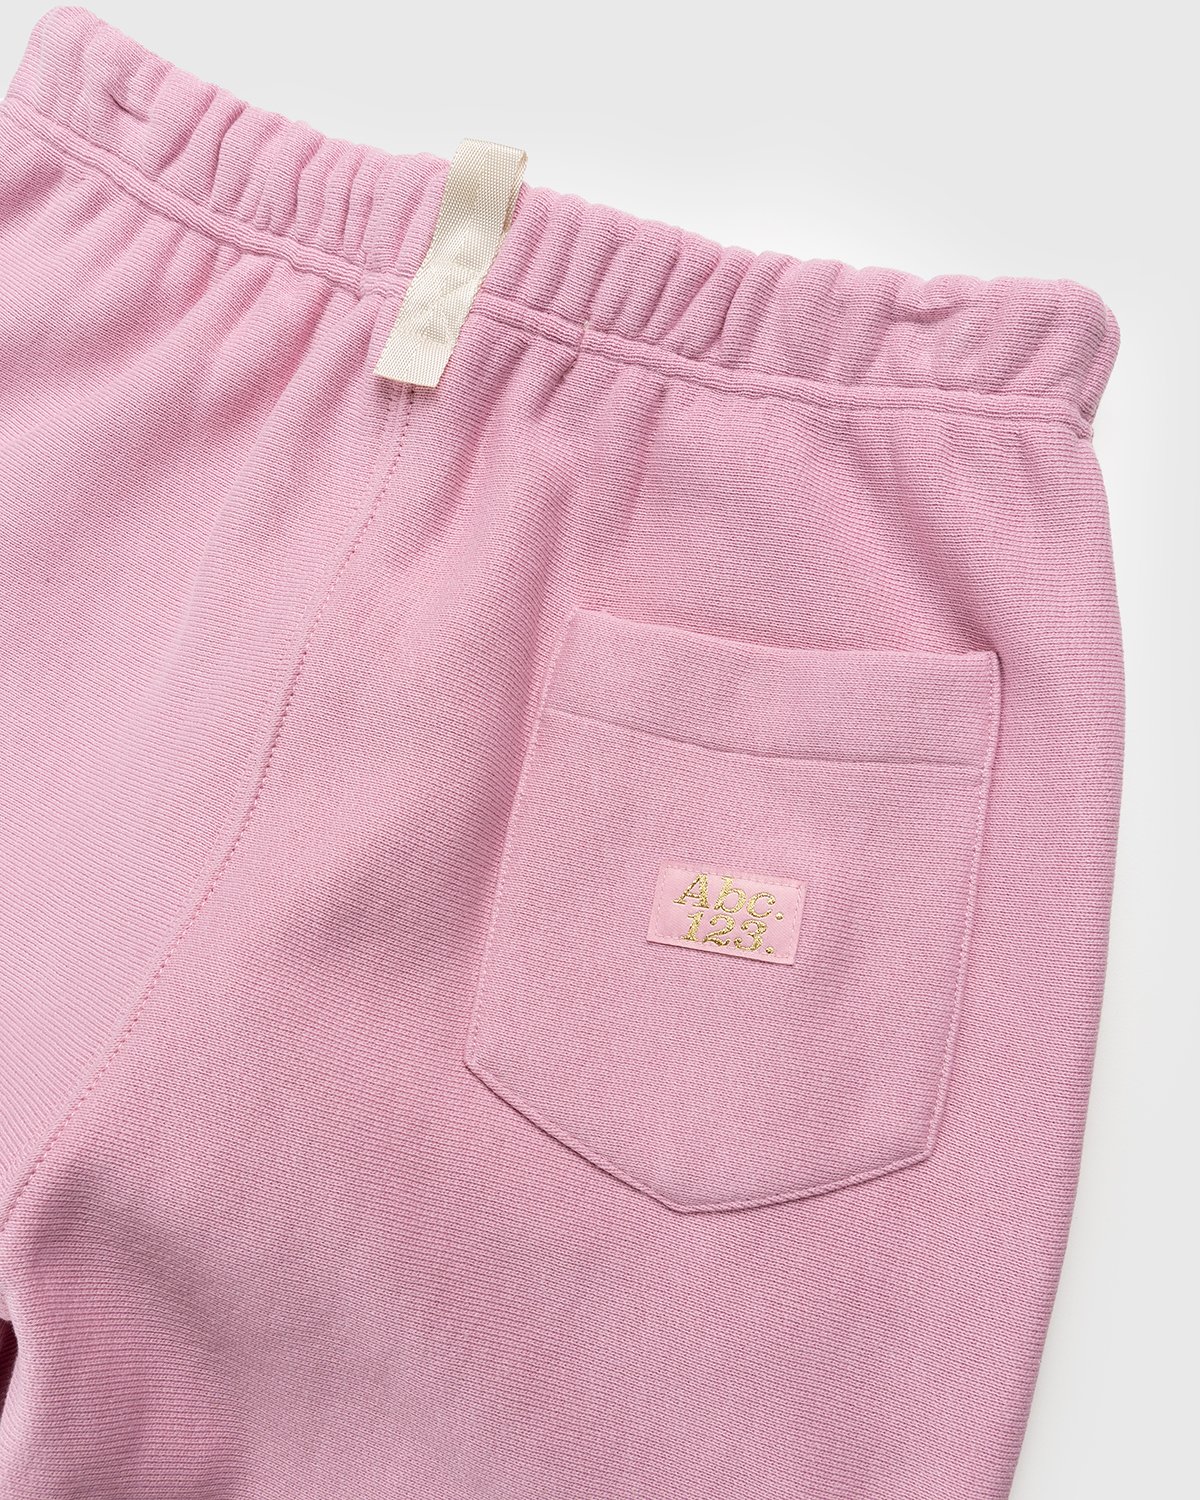 Abc. - French Terry Sweatpants Morganite - Clothing - Pink - Image 3